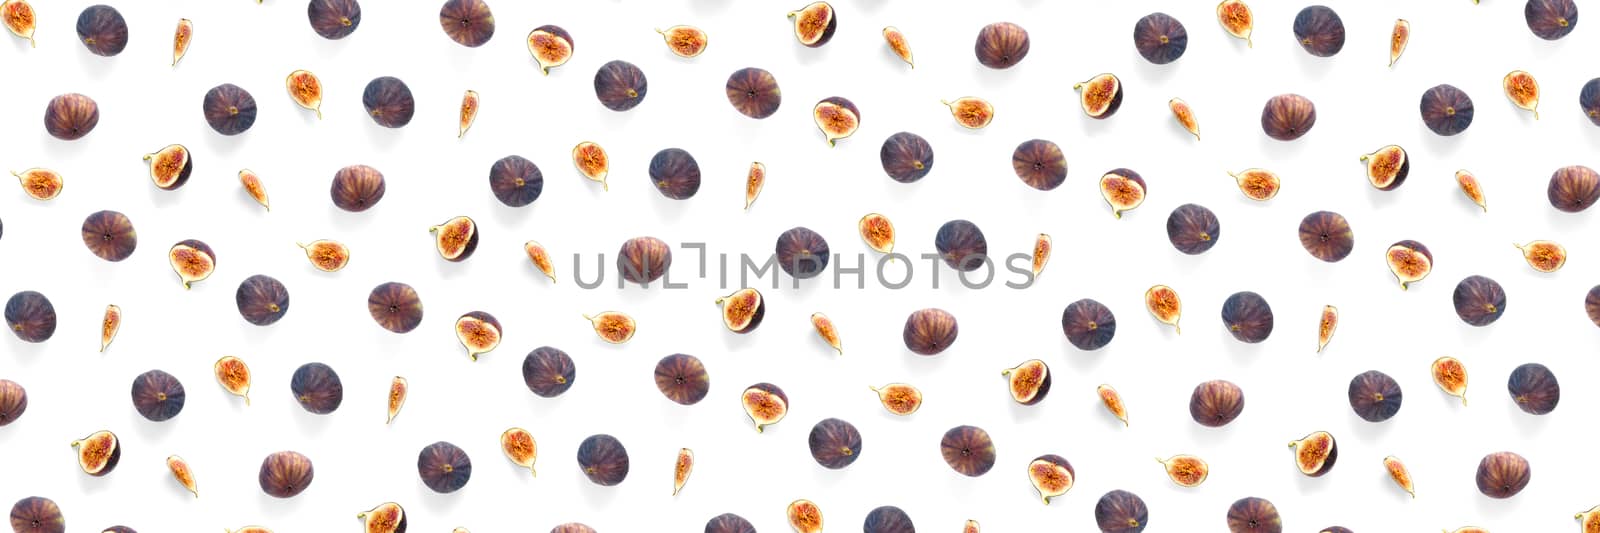 Background from Fresh figs. Food Photo. Creative set of the whole and sliced figs on a white background, Modern fig fruits background. by PhotoTime